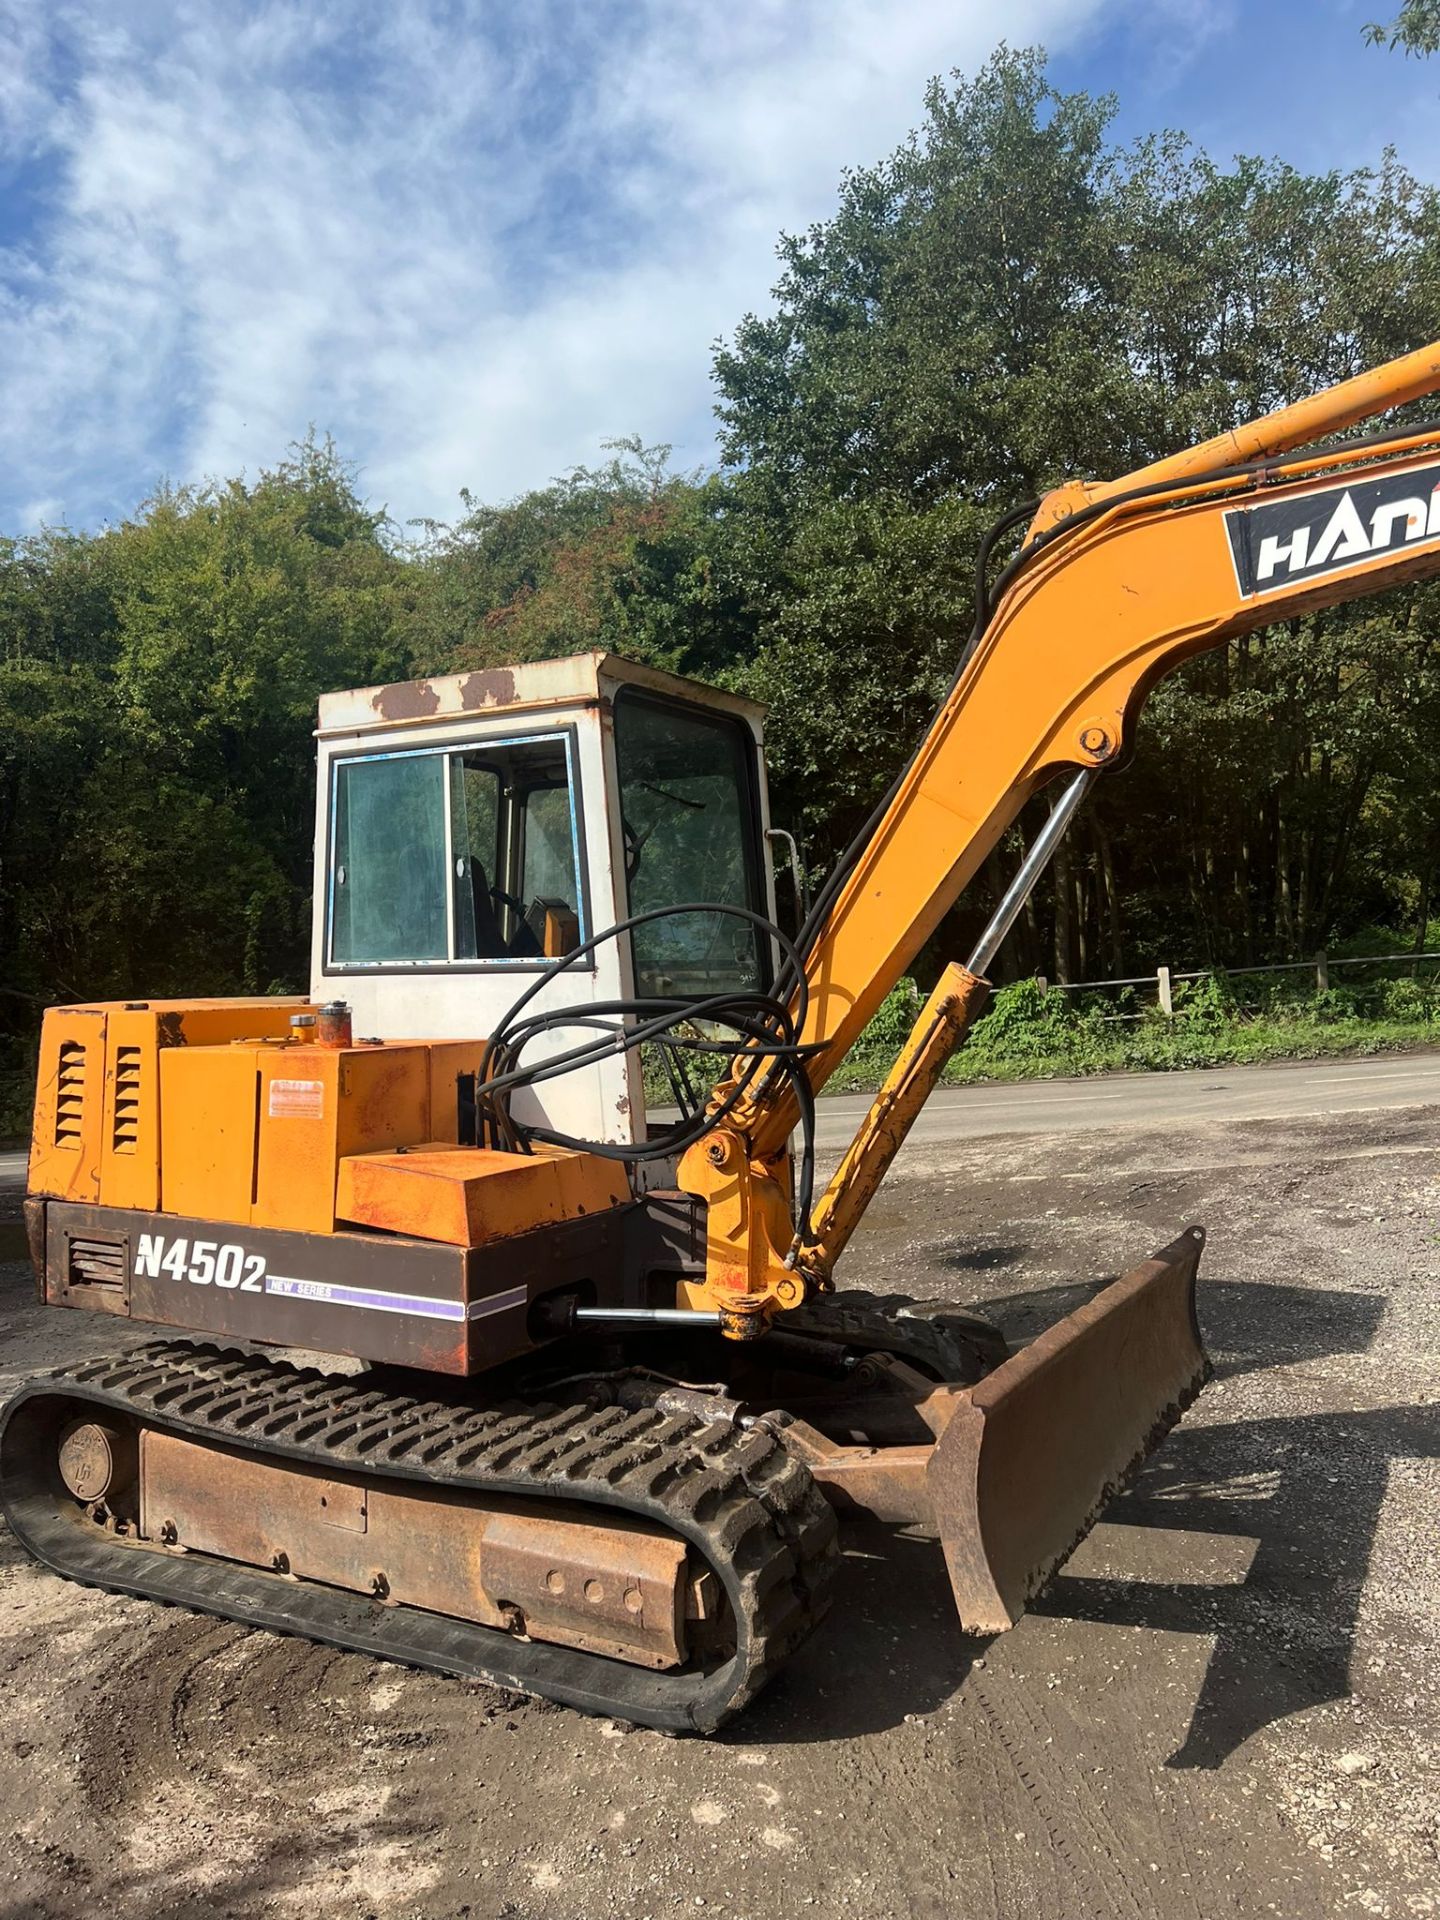 HANIX N450-2 tracked excavator 4.5 TON - RUNS DRIVES AND DIGS *PLUS VAT* - Image 3 of 8